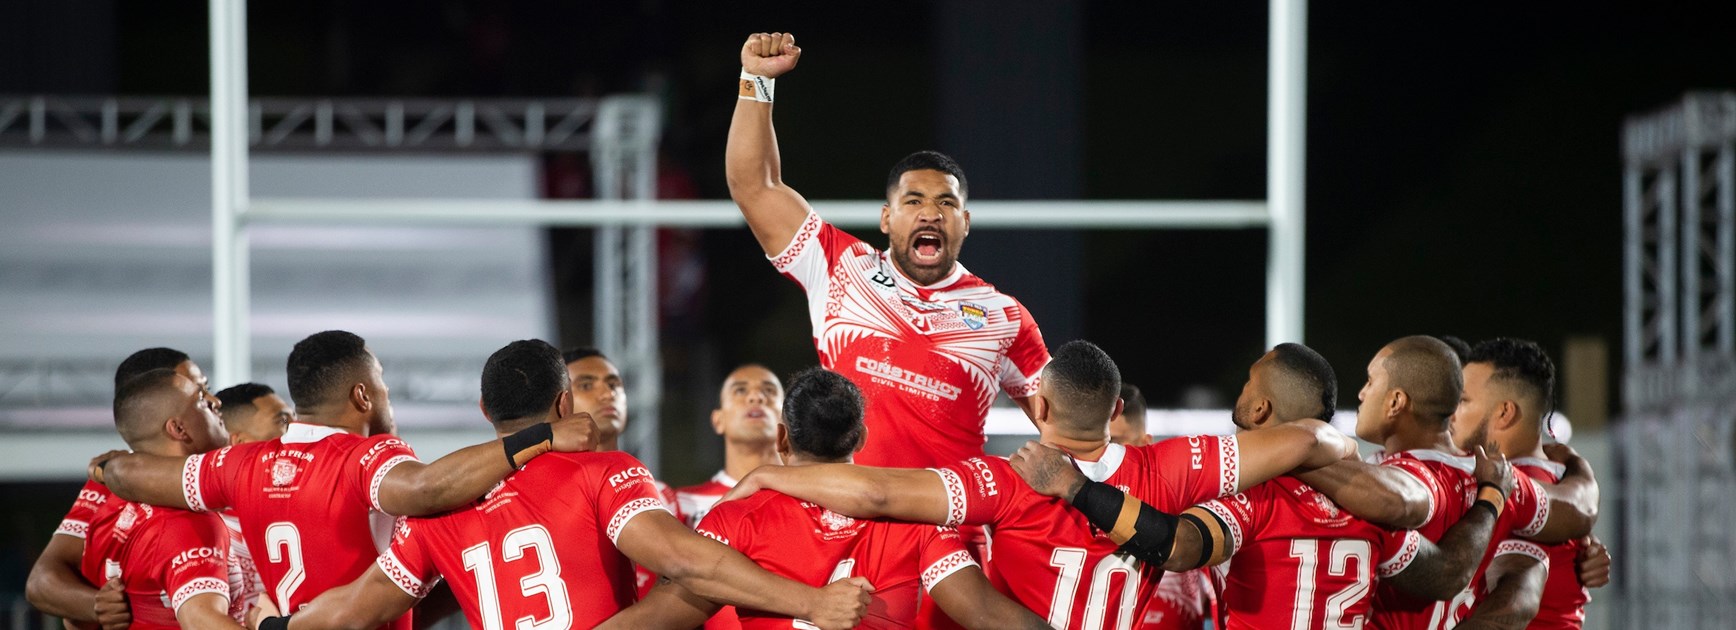 Woolf to coach full strength Tonga in end-of-season Tests